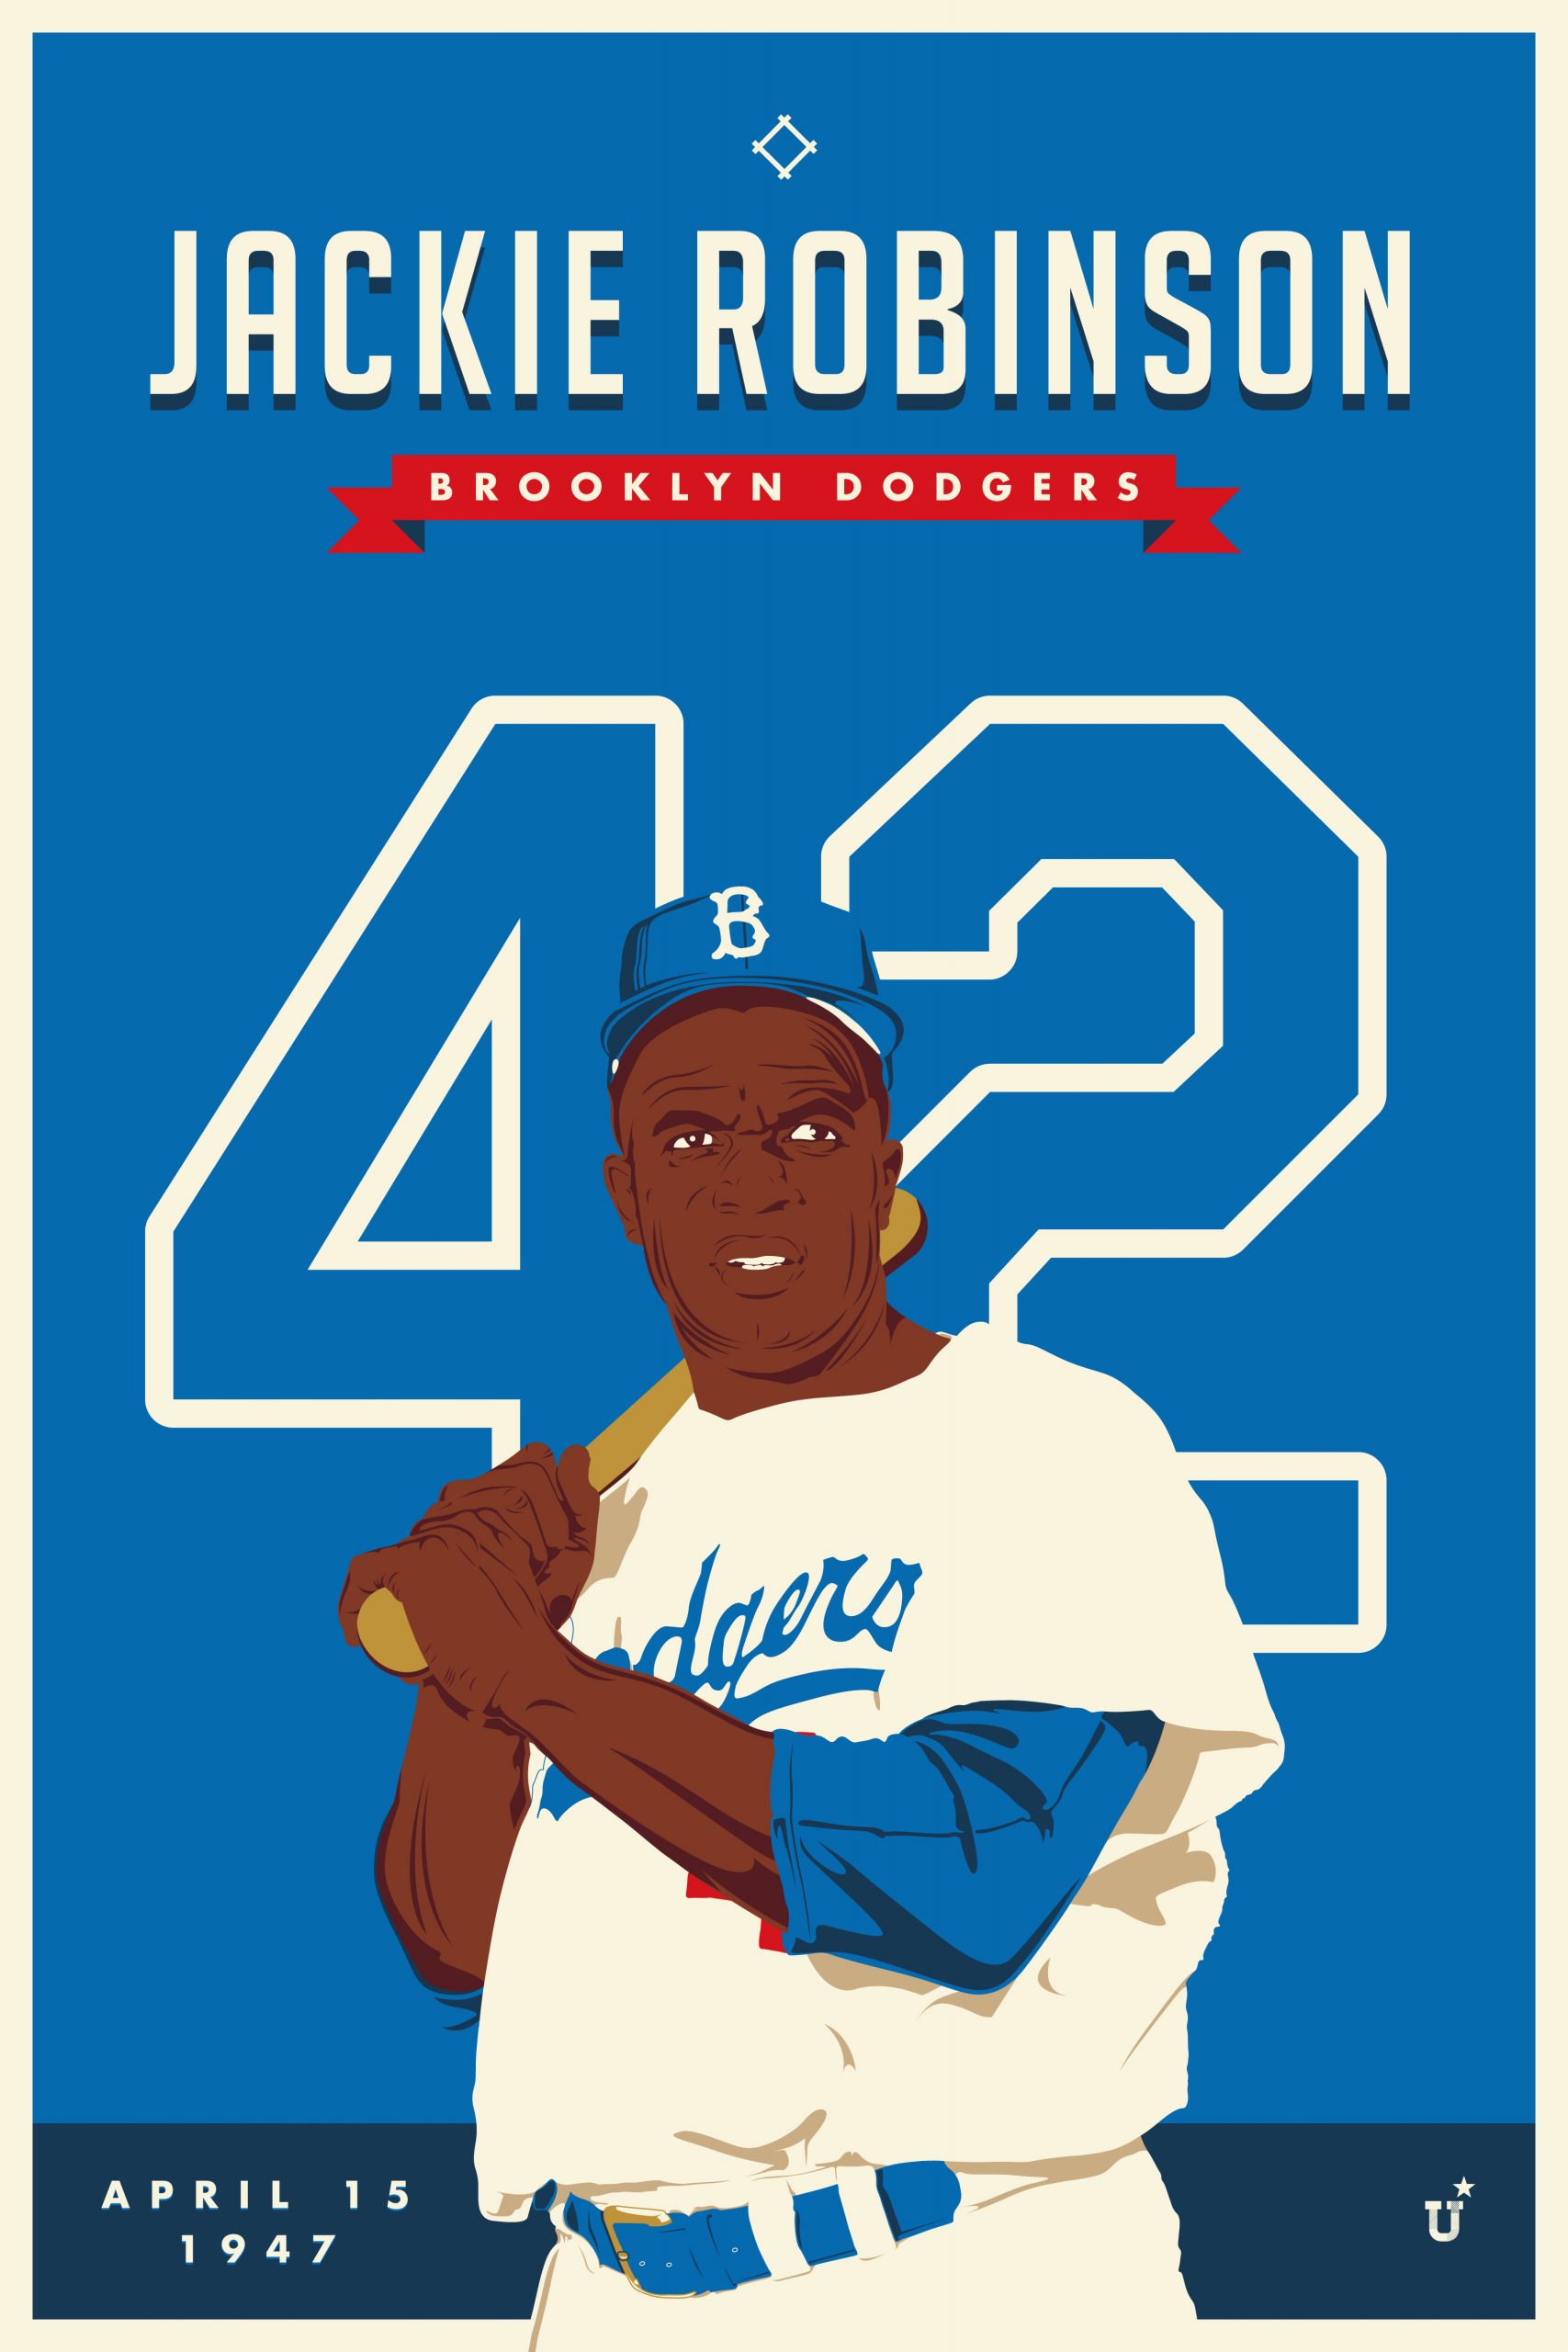 UNOFFICiAL ATHLETIC  Jackie Robinson Poster Design